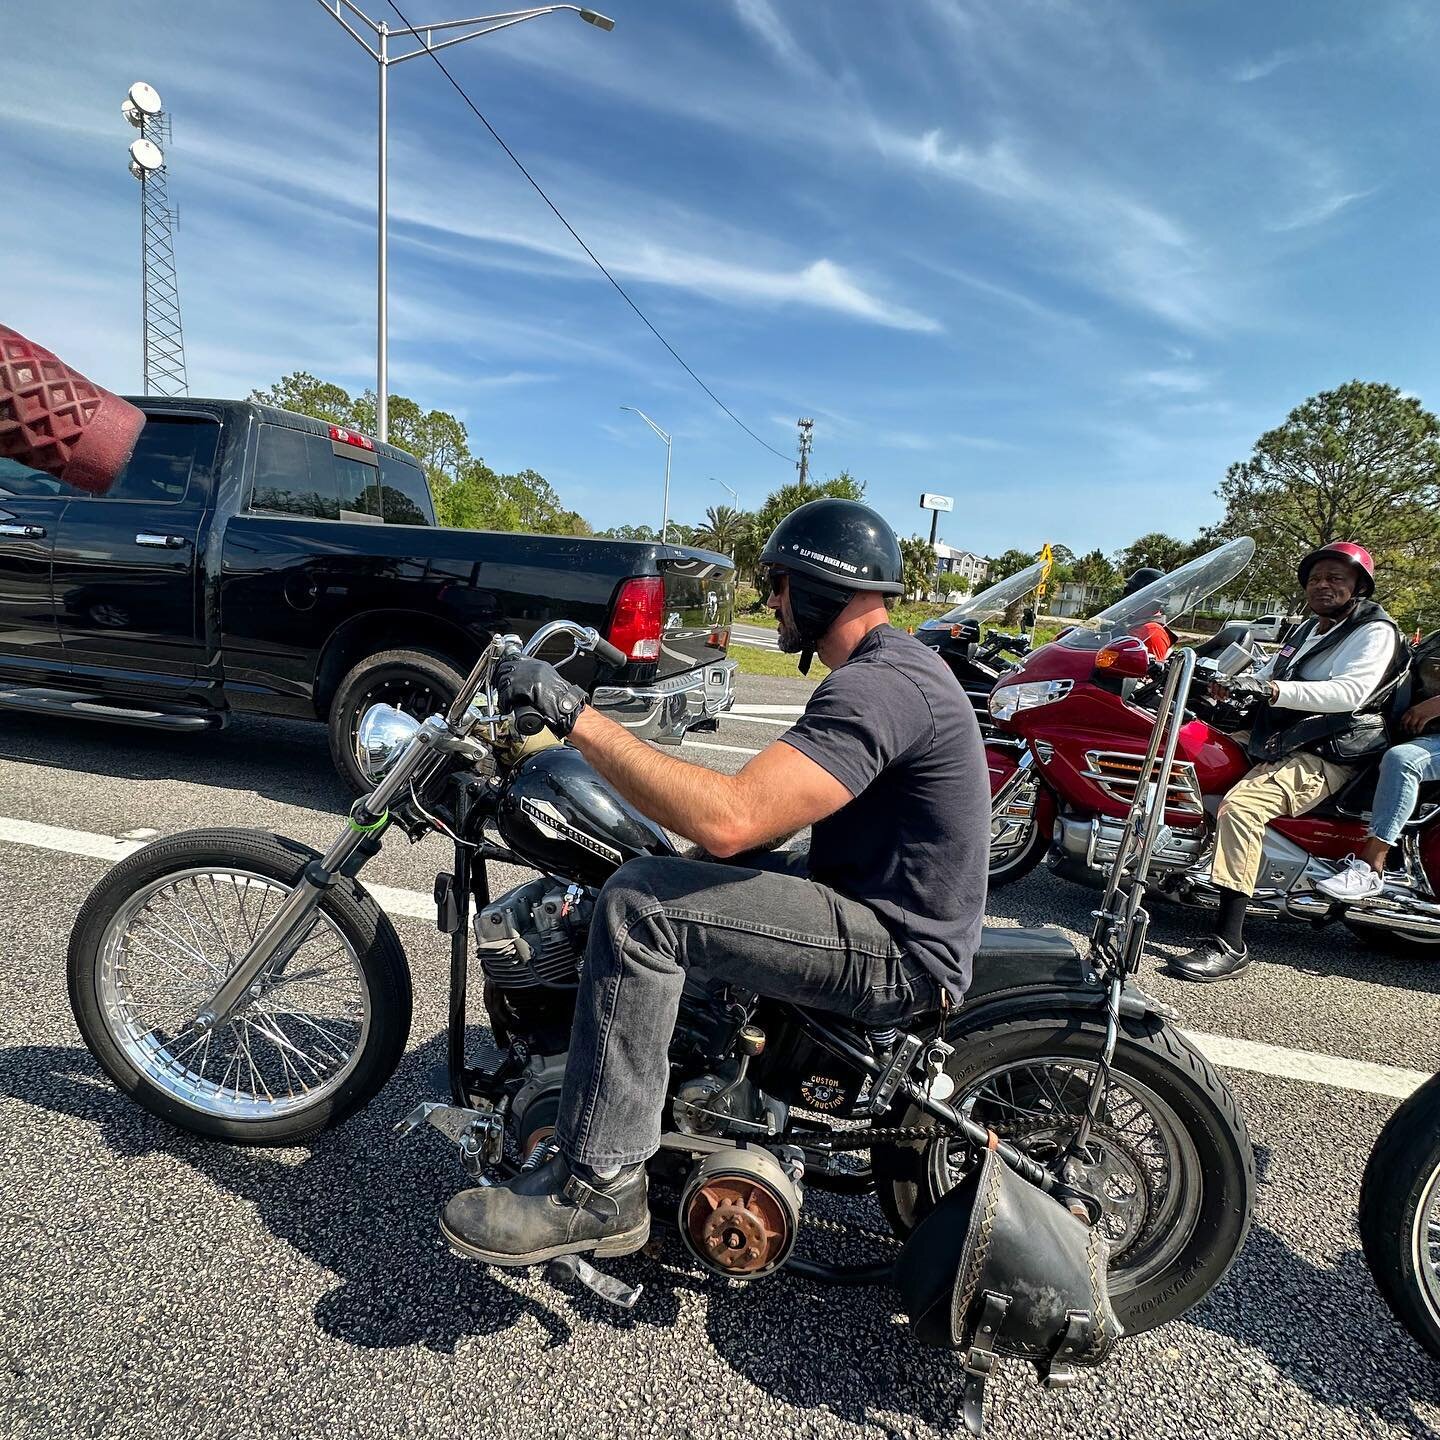 Tough Enough helmet was awesome this week in Daytona. Since I never have product shots, I have to wait until @moshwithmee snaps a pic while we rally in traffic. 👍🏽👍🏽👍🏽 #motorcyclegloves #cyclesourcemagazine #motoculture #makebikersbuffagain #Ha